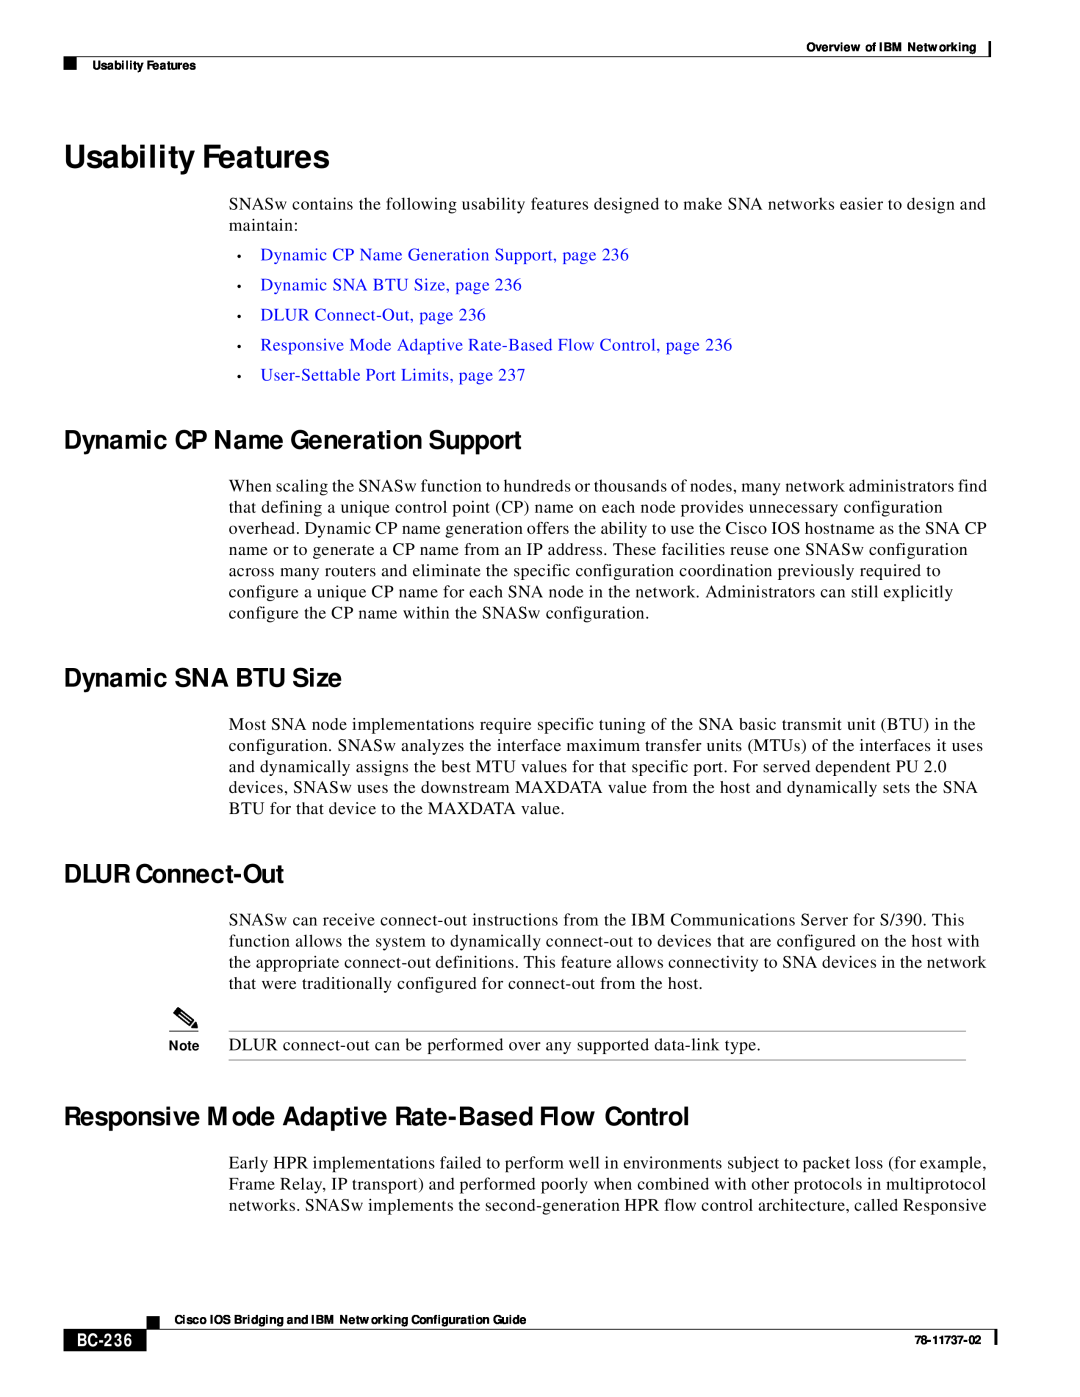 IBM BC-201 manual Usability Features, Dynamic CP Name Generation Support, Dynamic SNA BTU Size, DLUR Connect-Out, BC-236 